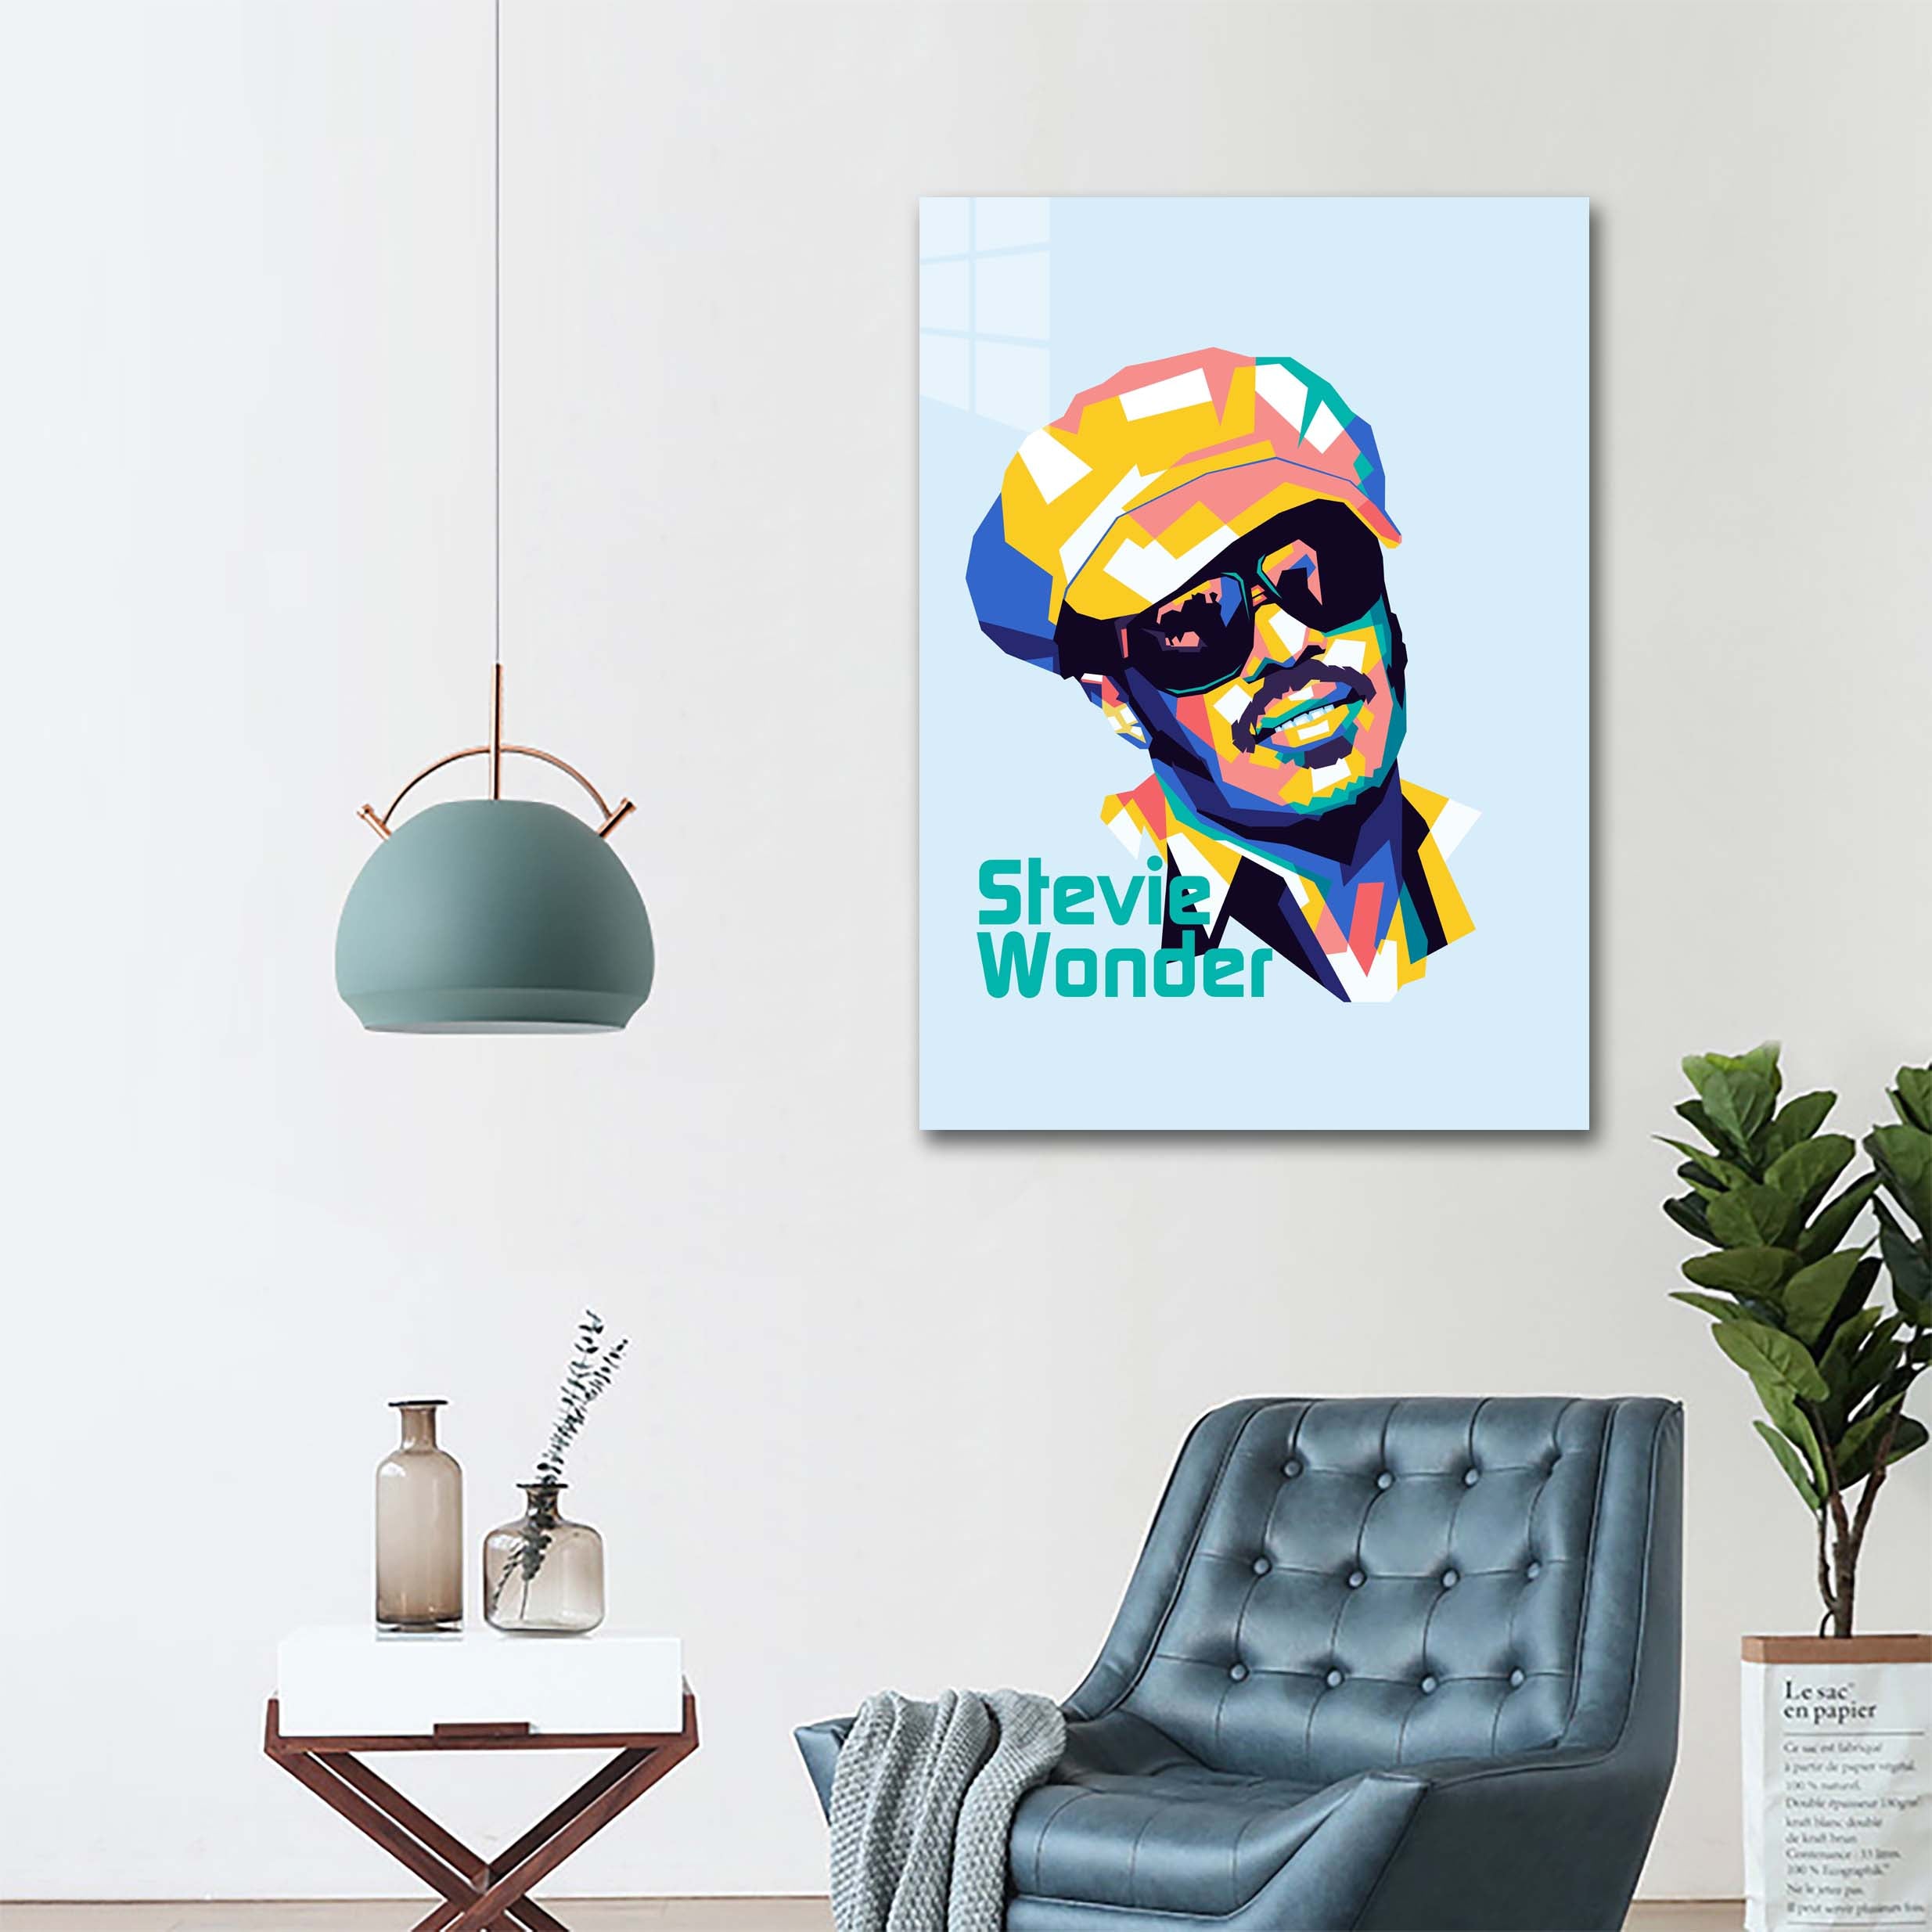 Stevie Wonder-01-designed by @Wpapmalang